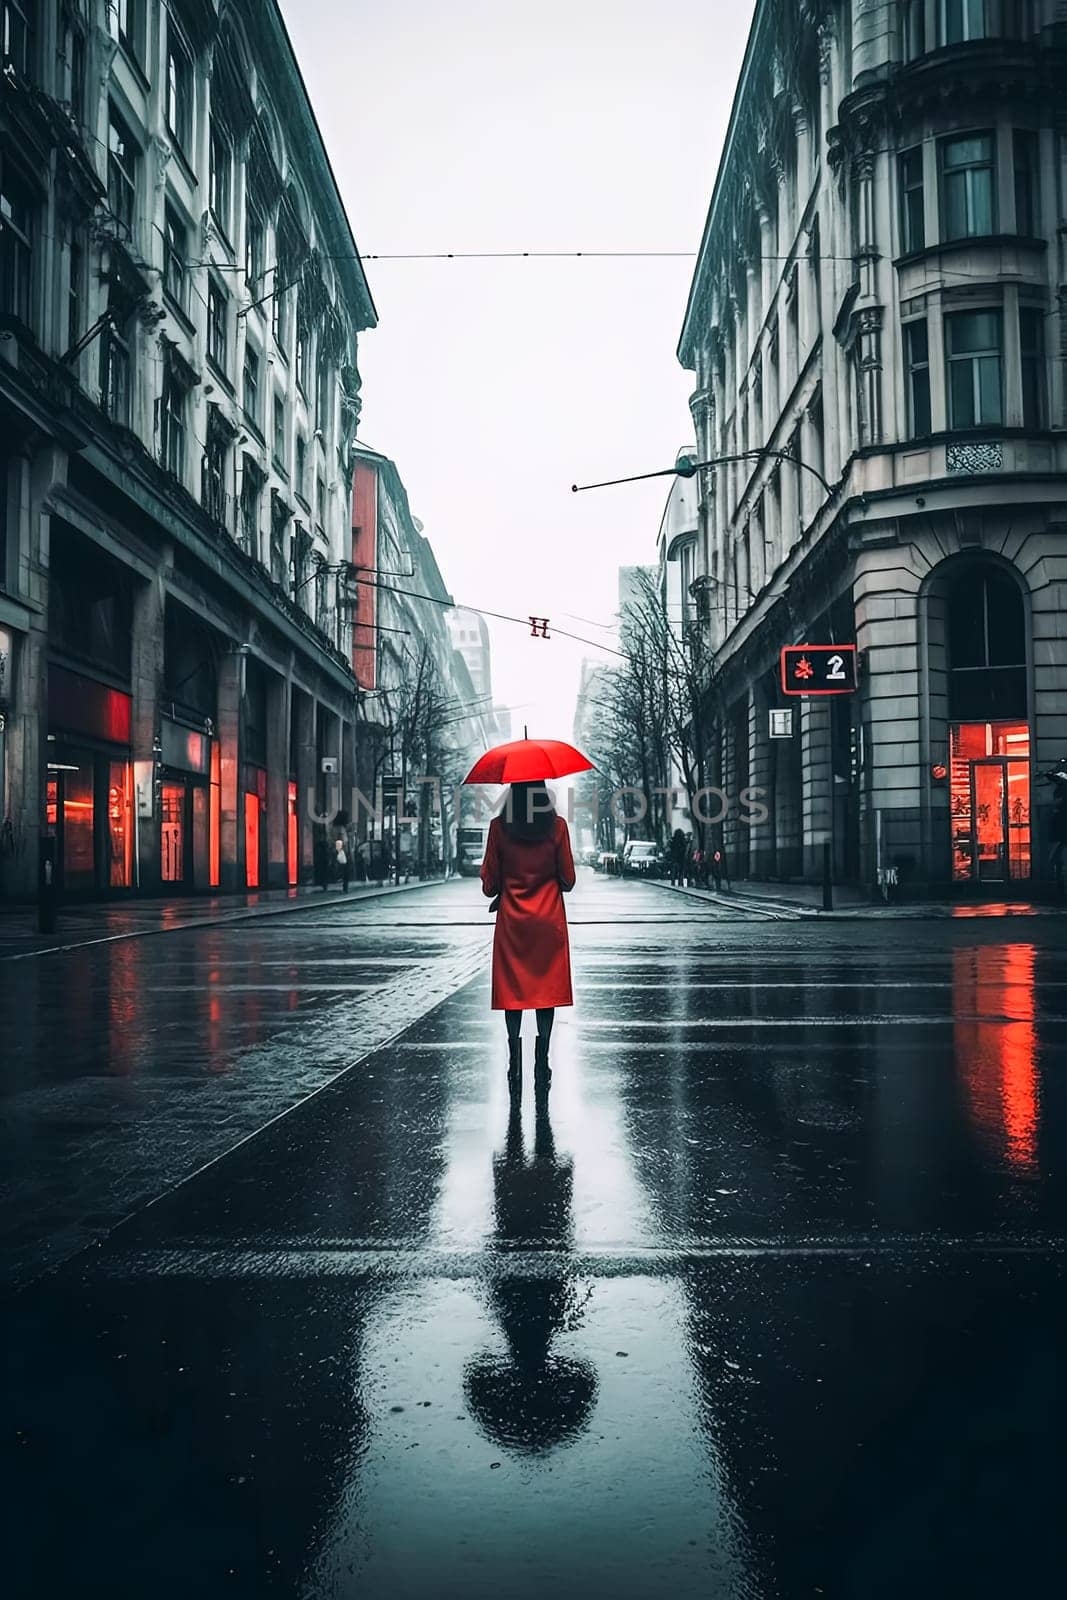 A woman walks down a city street at night. The street is wet and the lights are on, creating a moody atmosphere